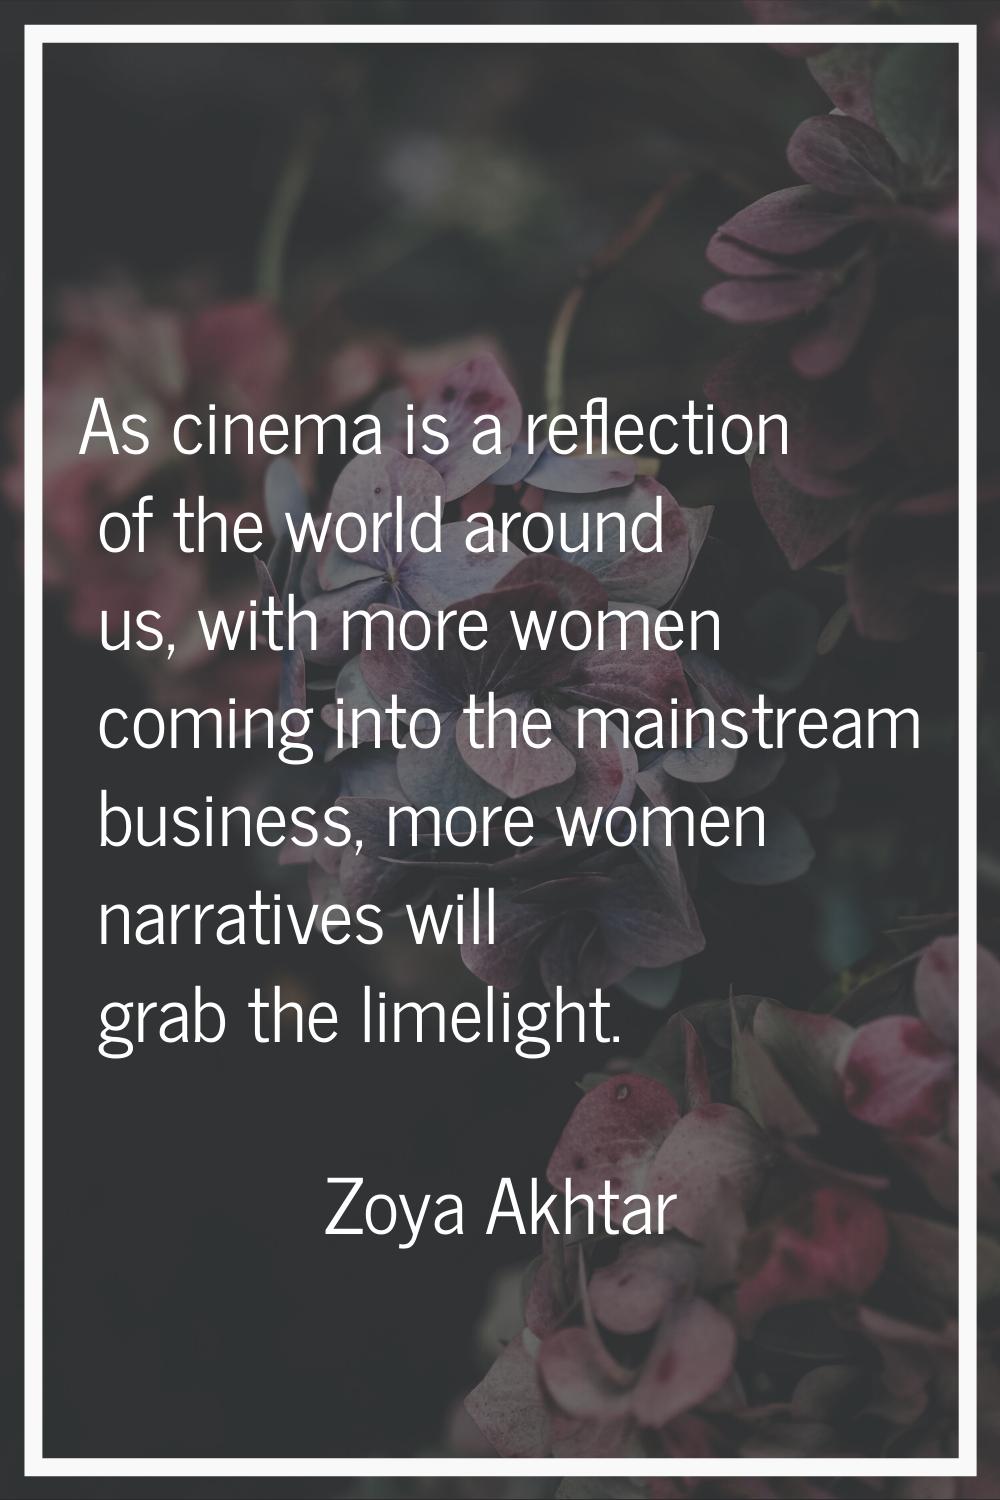 As cinema is a reflection of the world around us, with more women coming into the mainstream busine